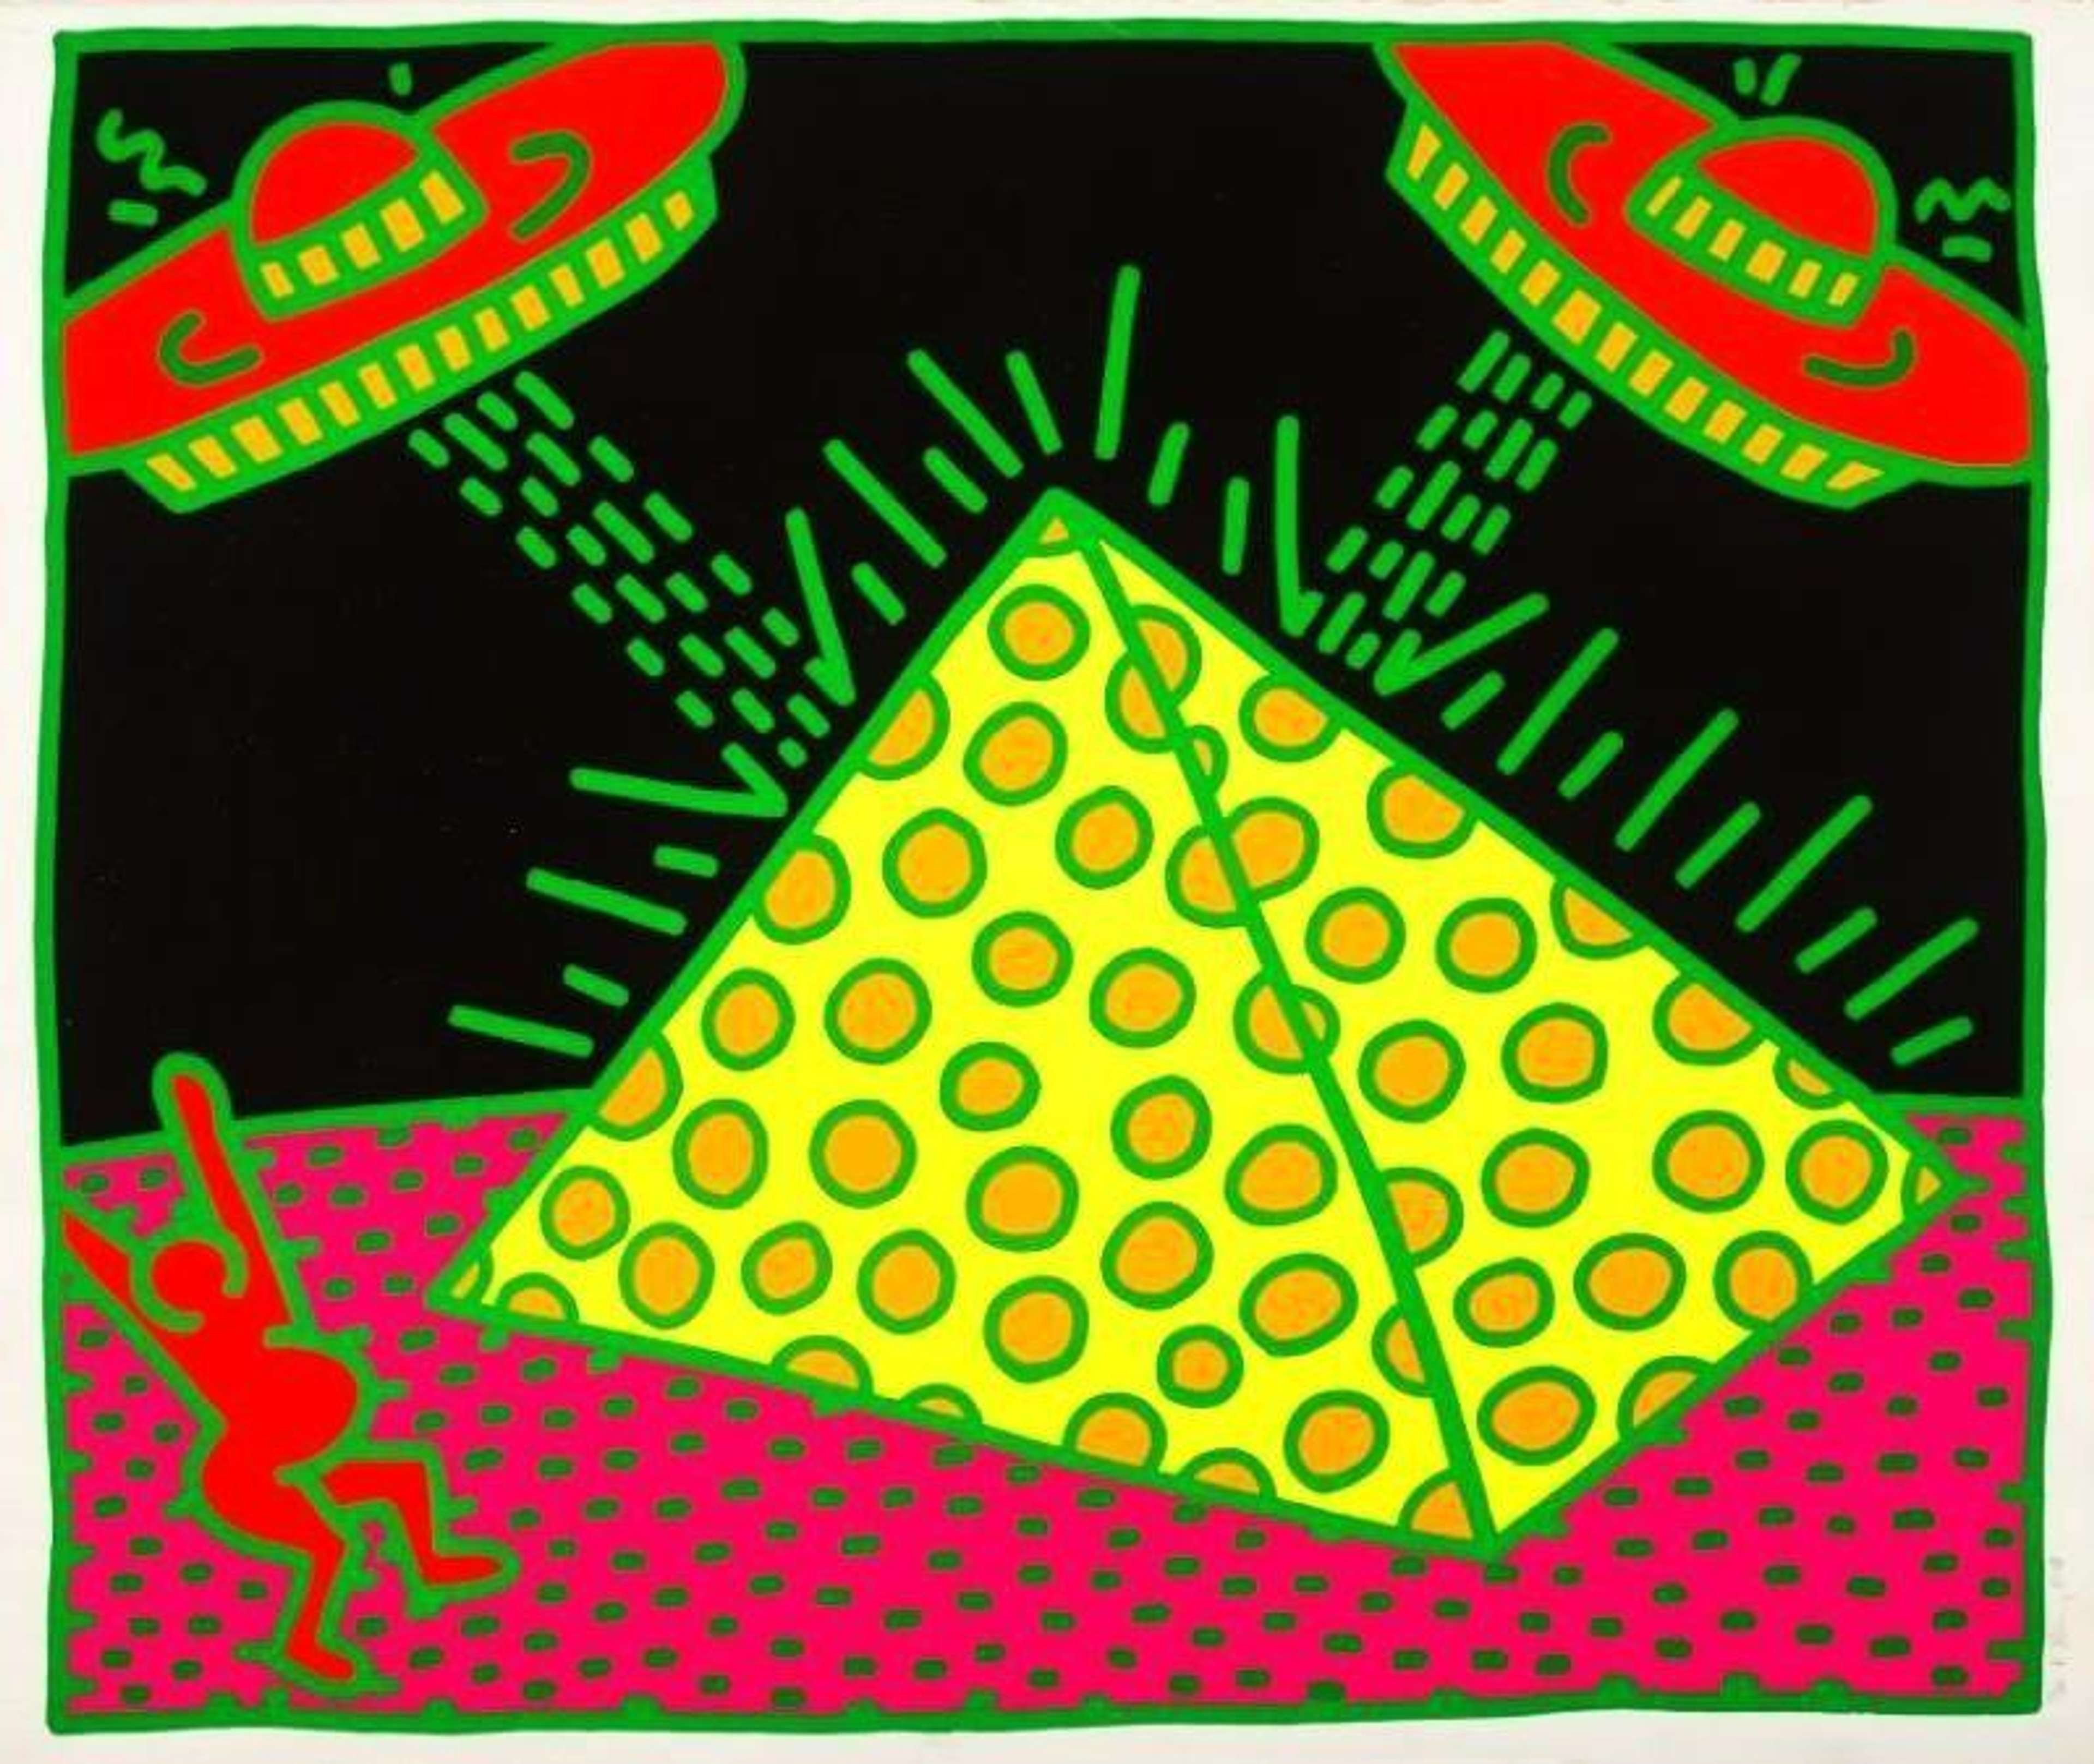 A screenprint by Keith Haring depicting a fluorescent yellow and green pyramid being shot at by two flying saucers. 